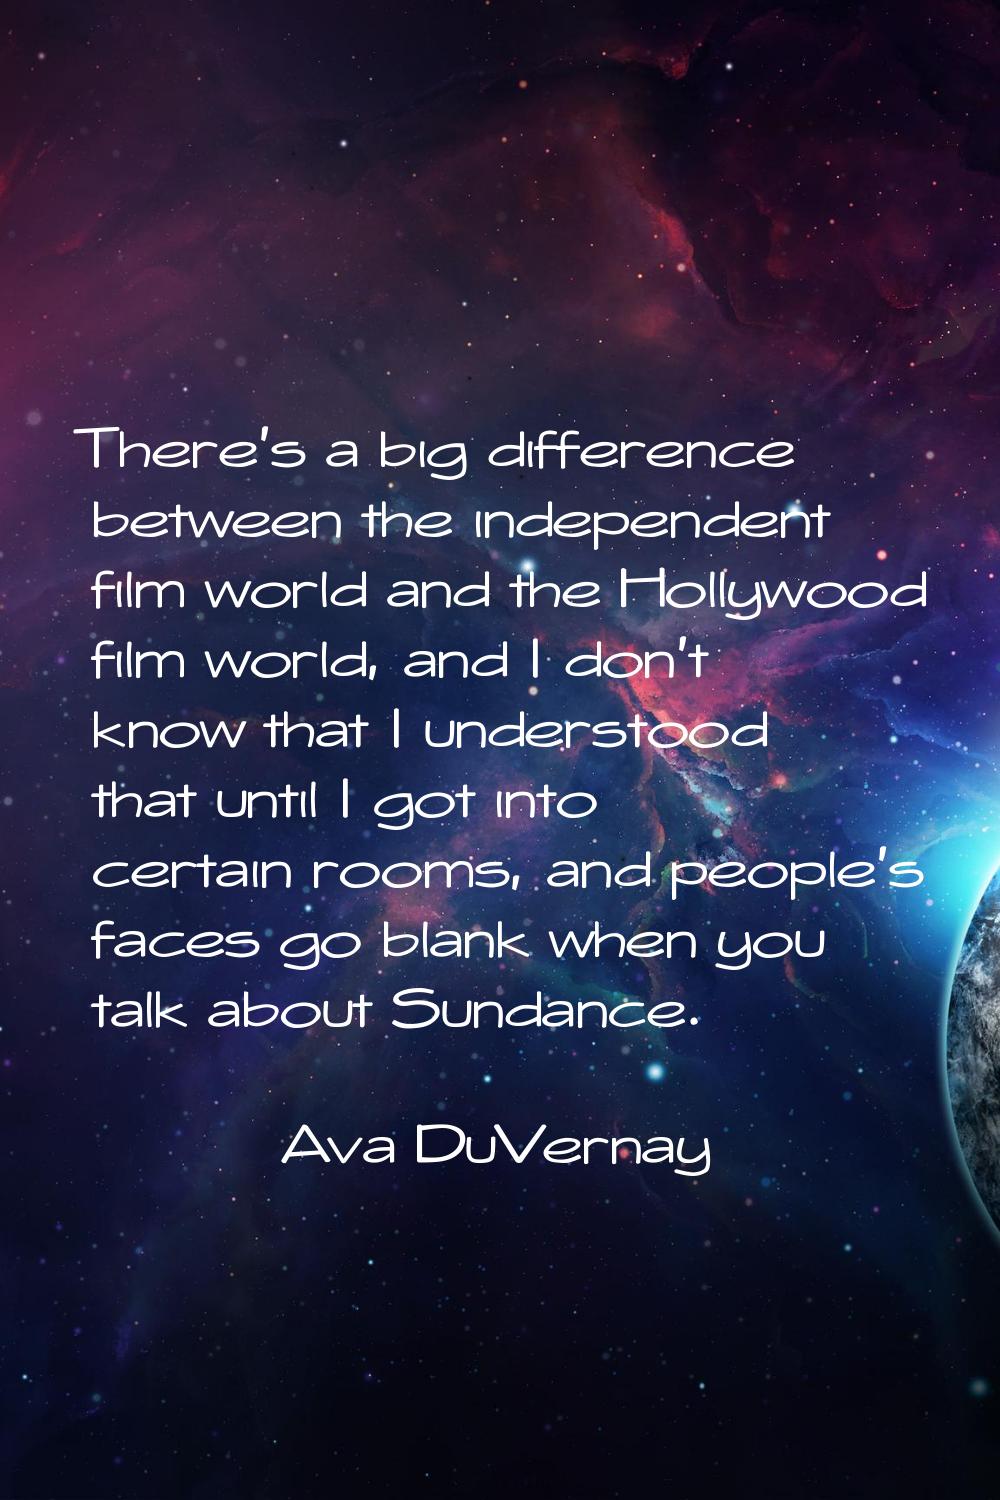 There's a big difference between the independent film world and the Hollywood film world, and I don